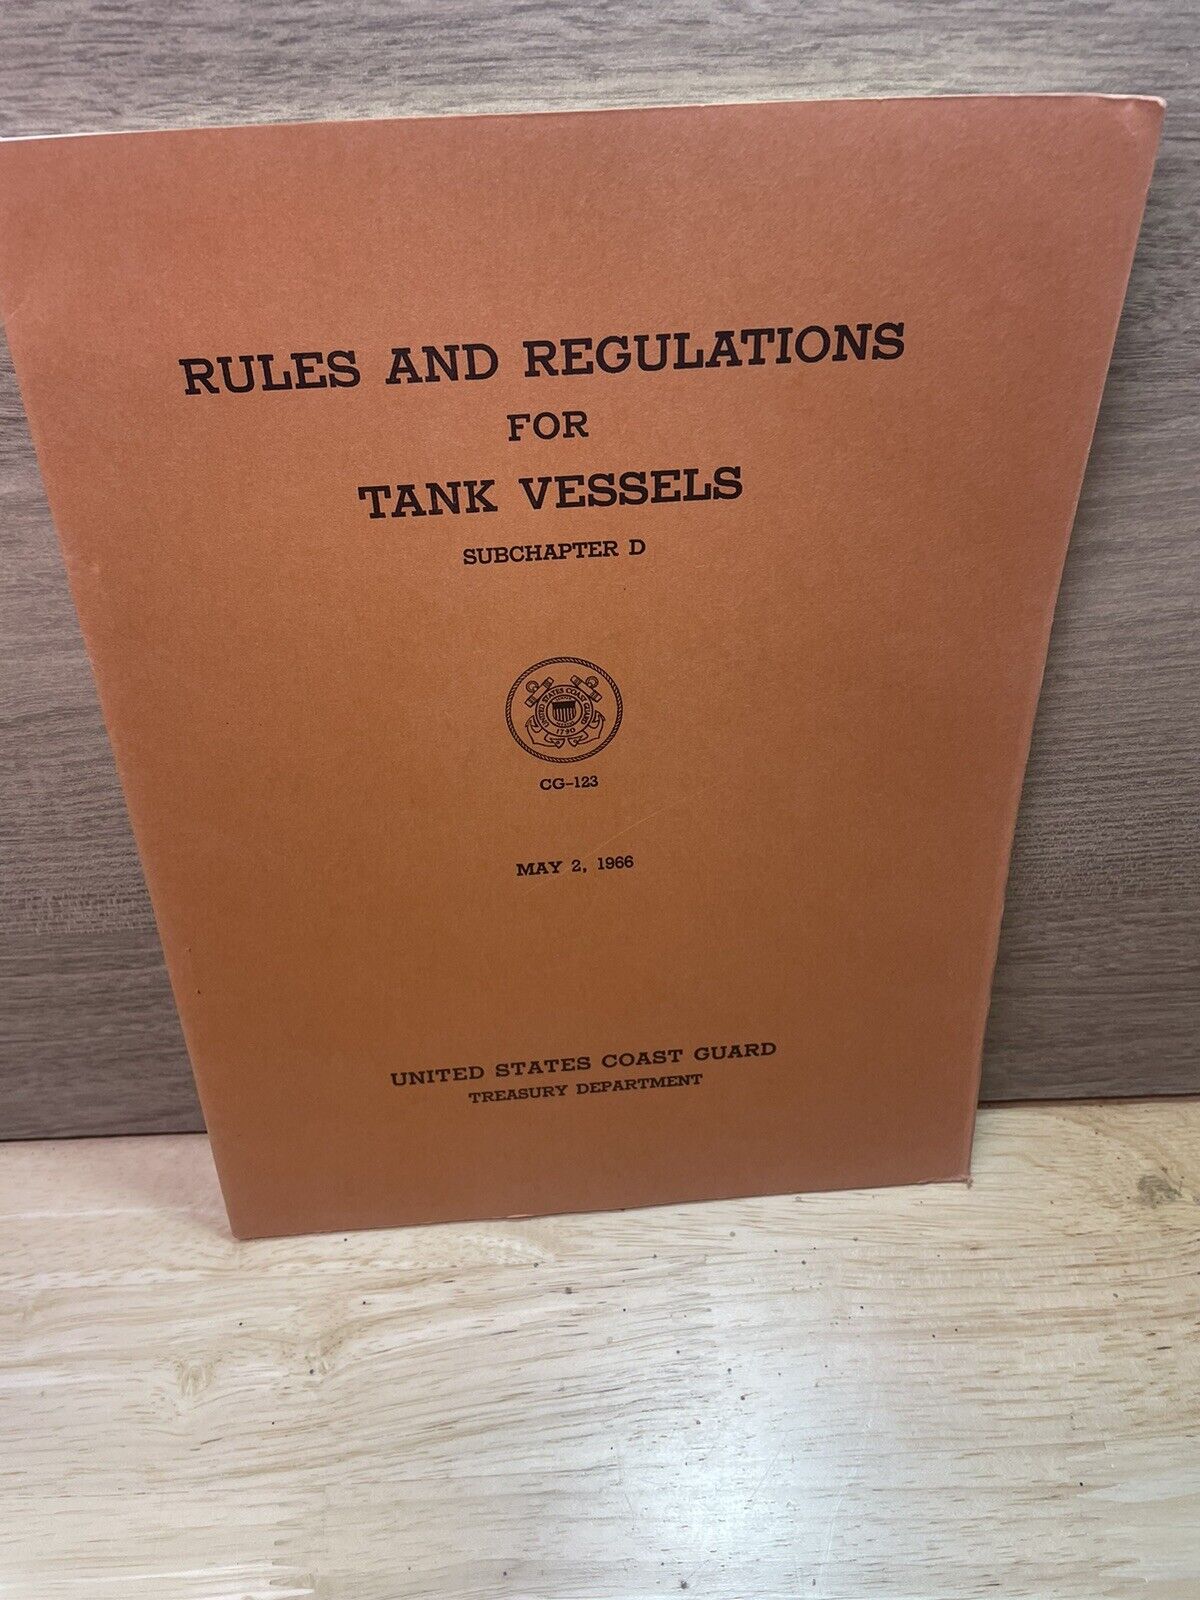 Rules And Regulations For Tank Vessels 1966 Coast Guard Cg-123 Subchapter D